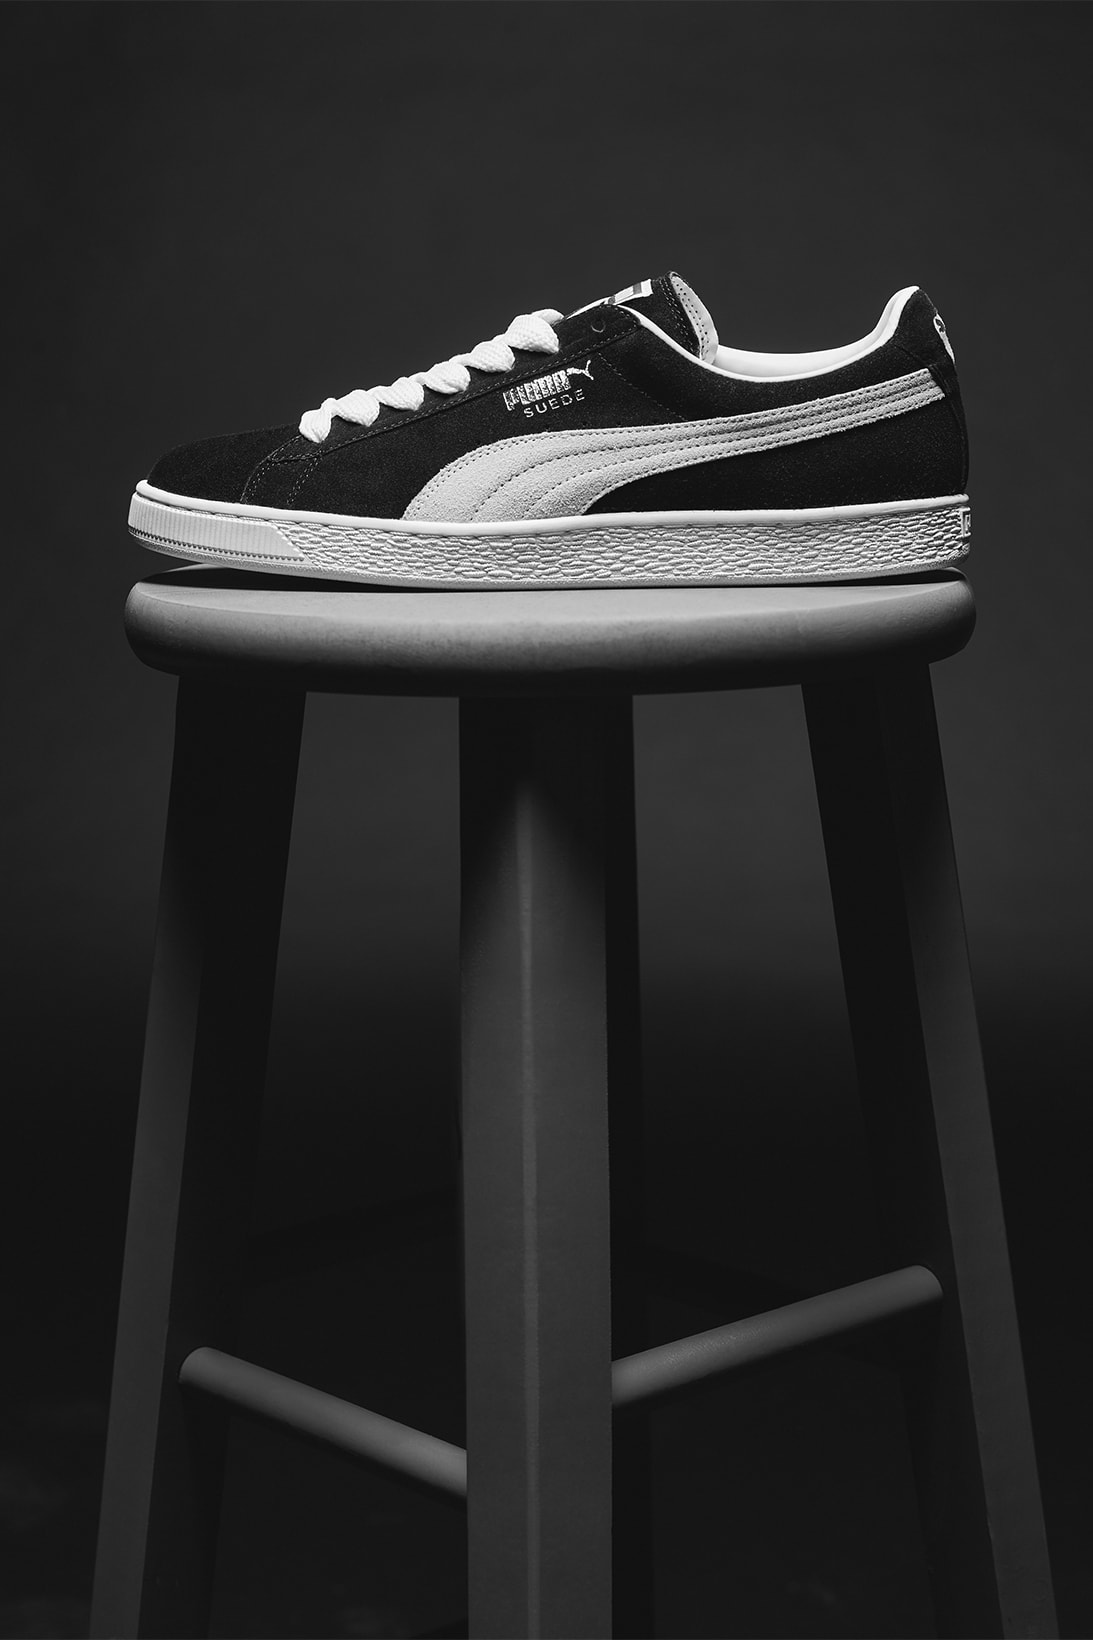 PUMA Suede 50th Anniversary Campaign 2017 2018 Tommie Smith